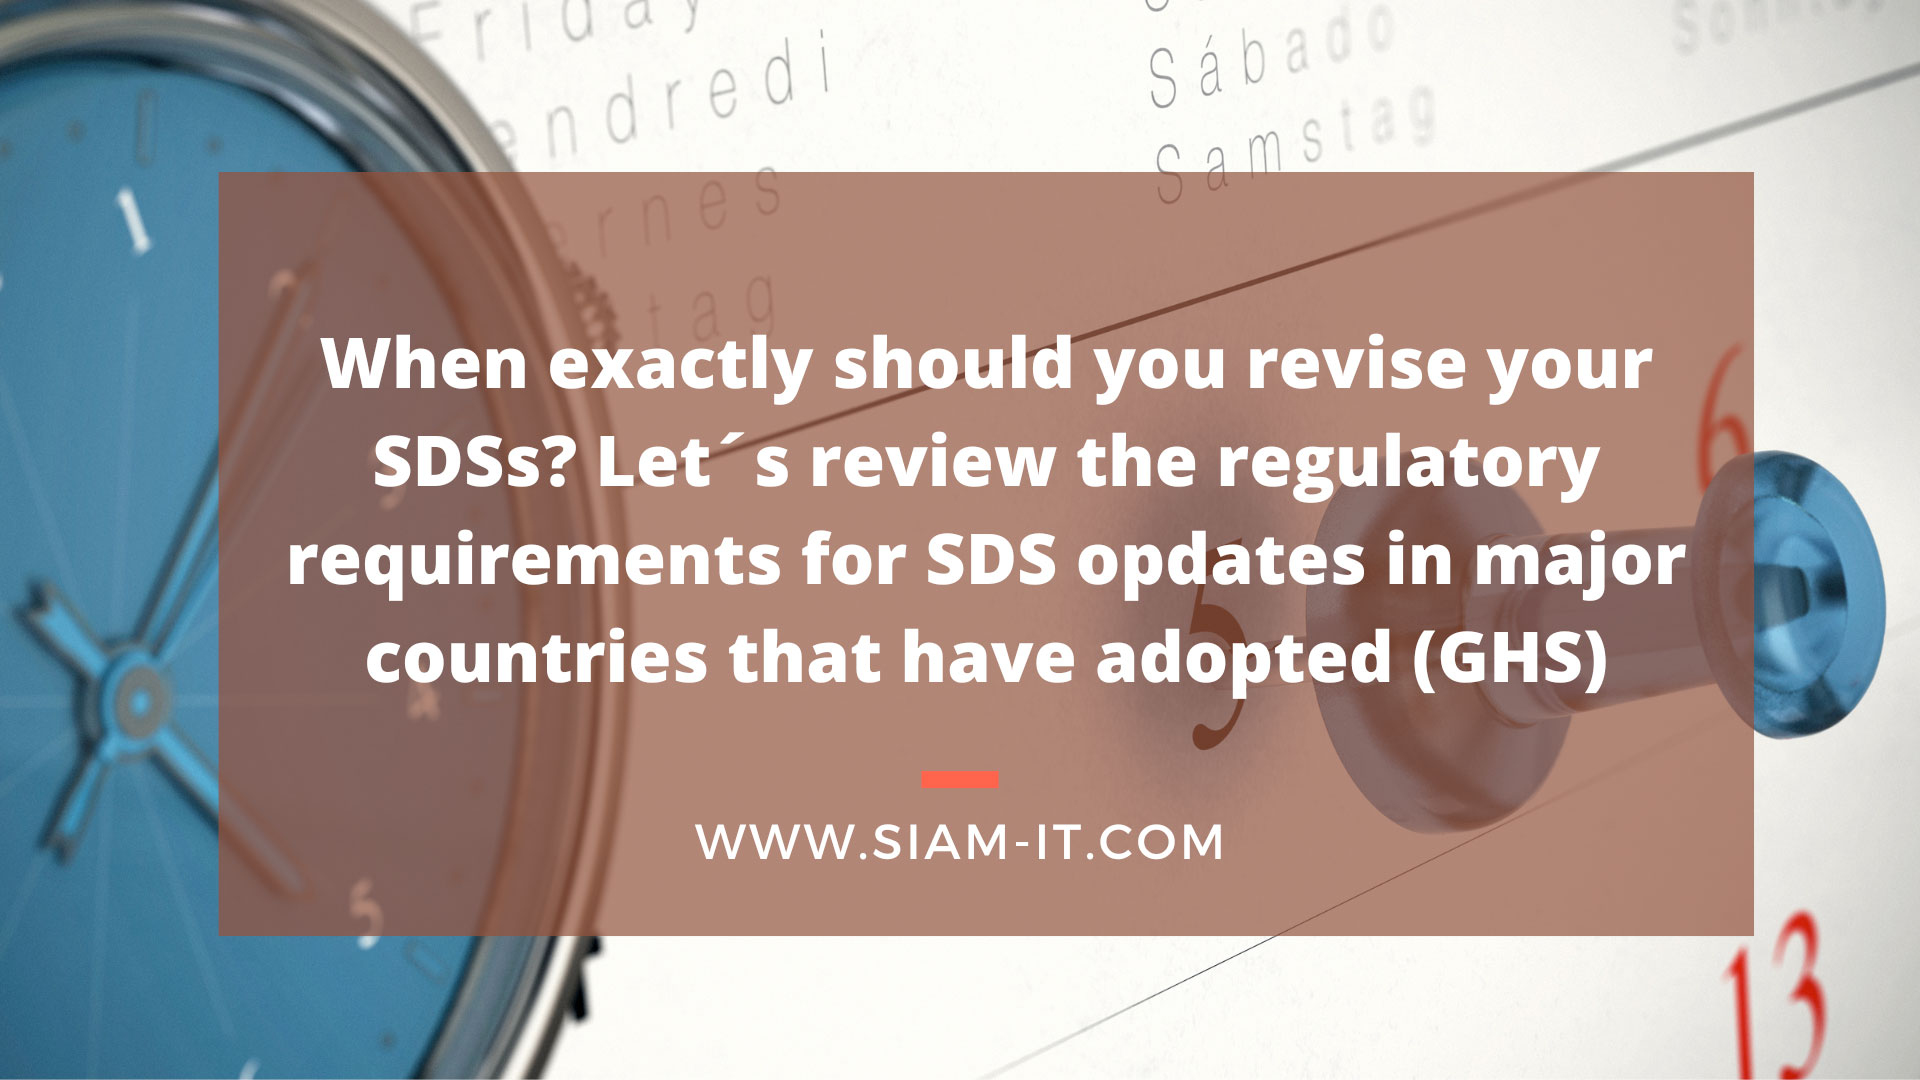 When to update or revise your safety data sheets (SDS): a global guideUnderstanding regulatory requirements in countries that have adopted GHS